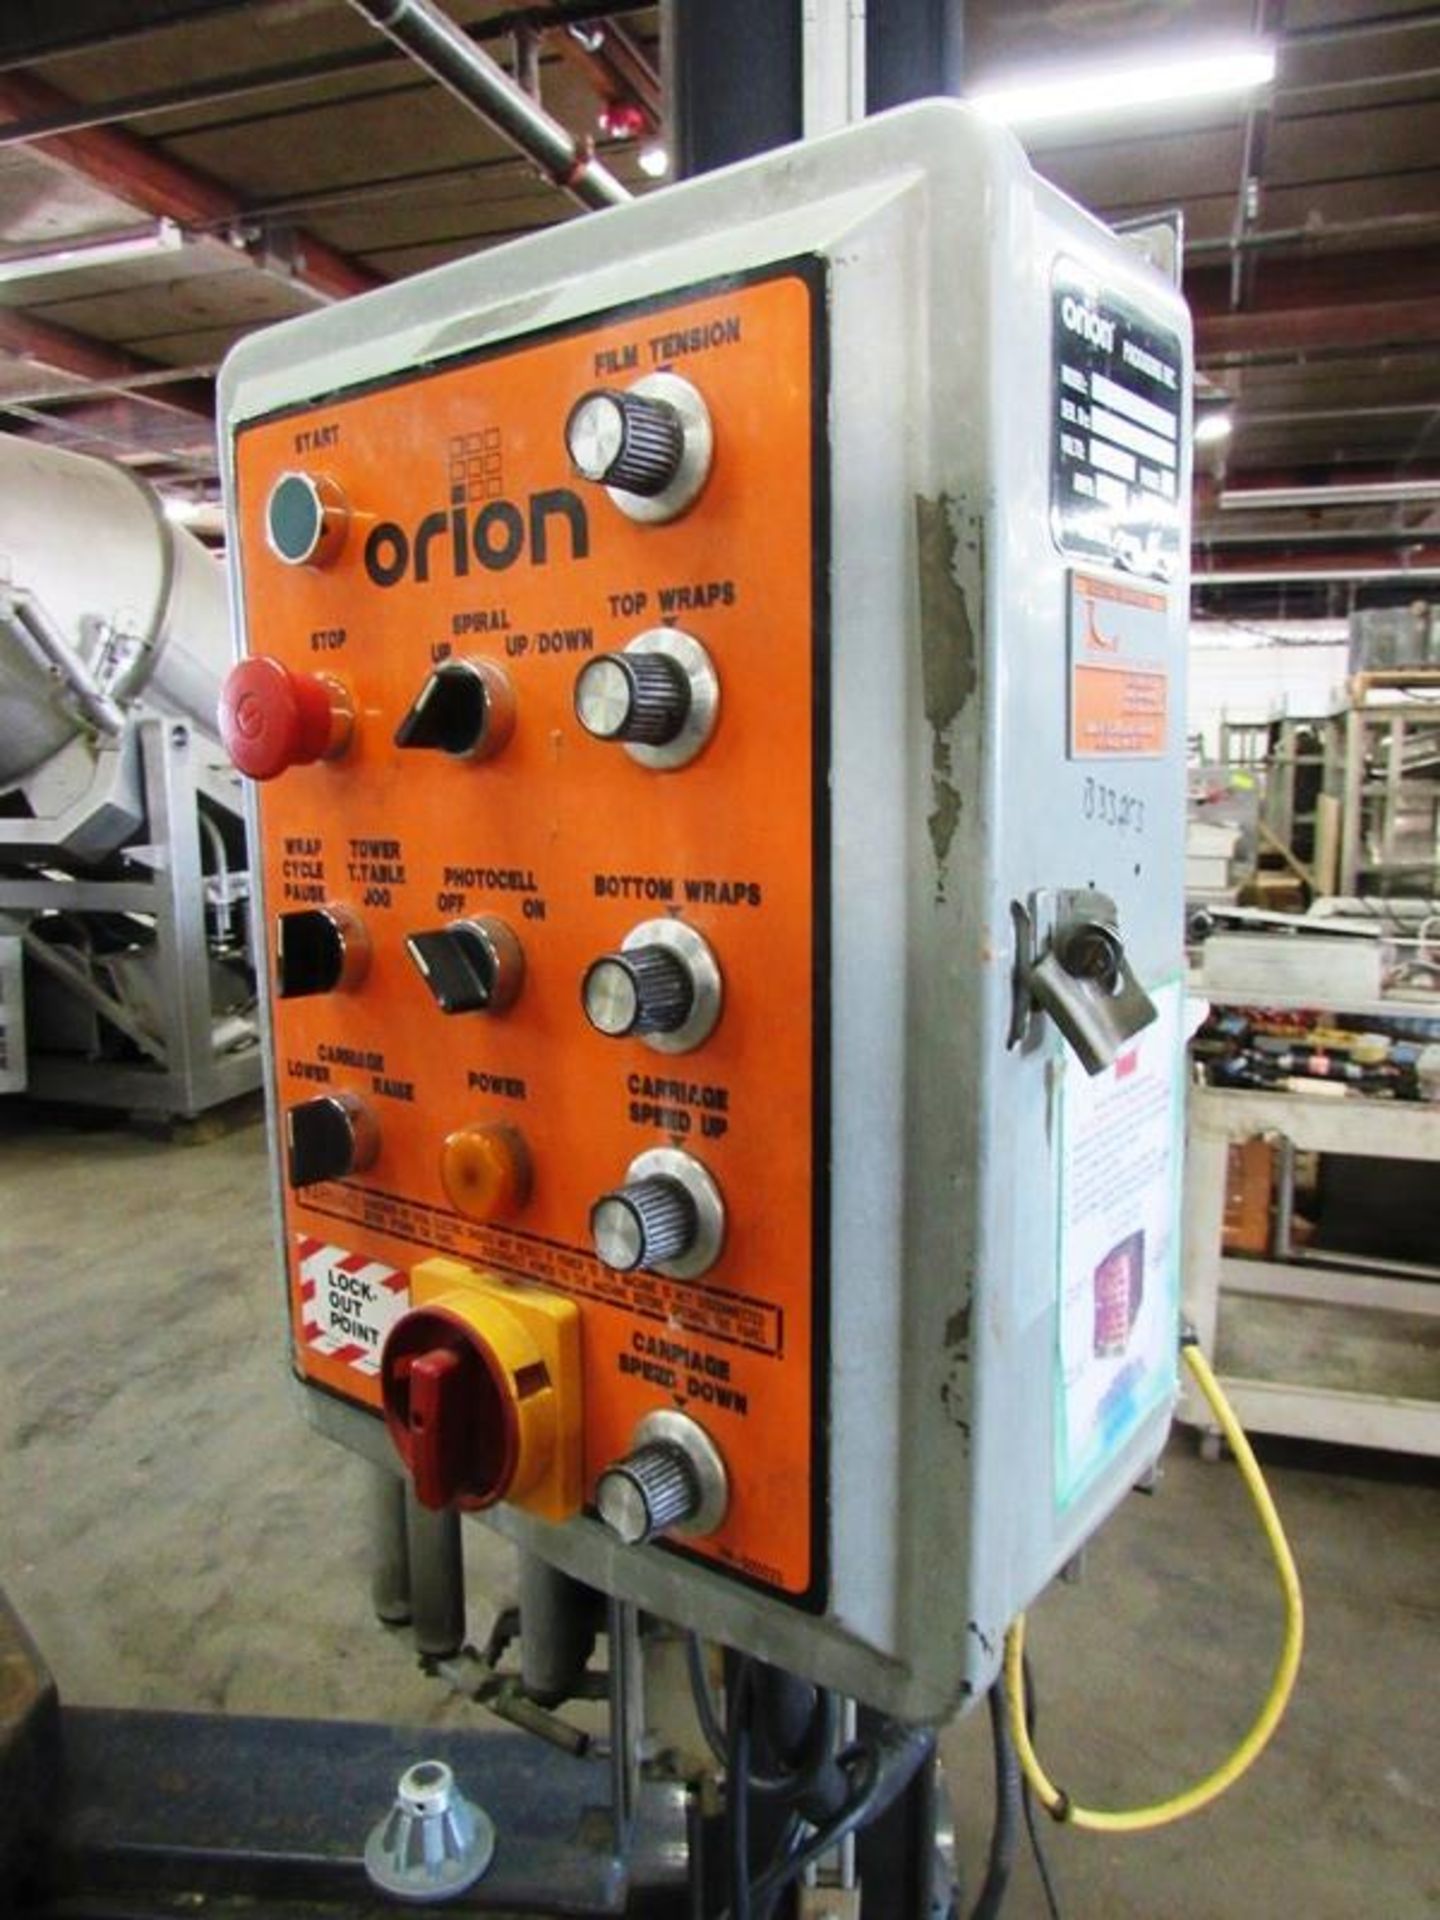 Orion Mdl. H55-9 Semi-Automatic Turn Table Pallet Wrapper, adjustable height to @65", adjustable - Image 10 of 12